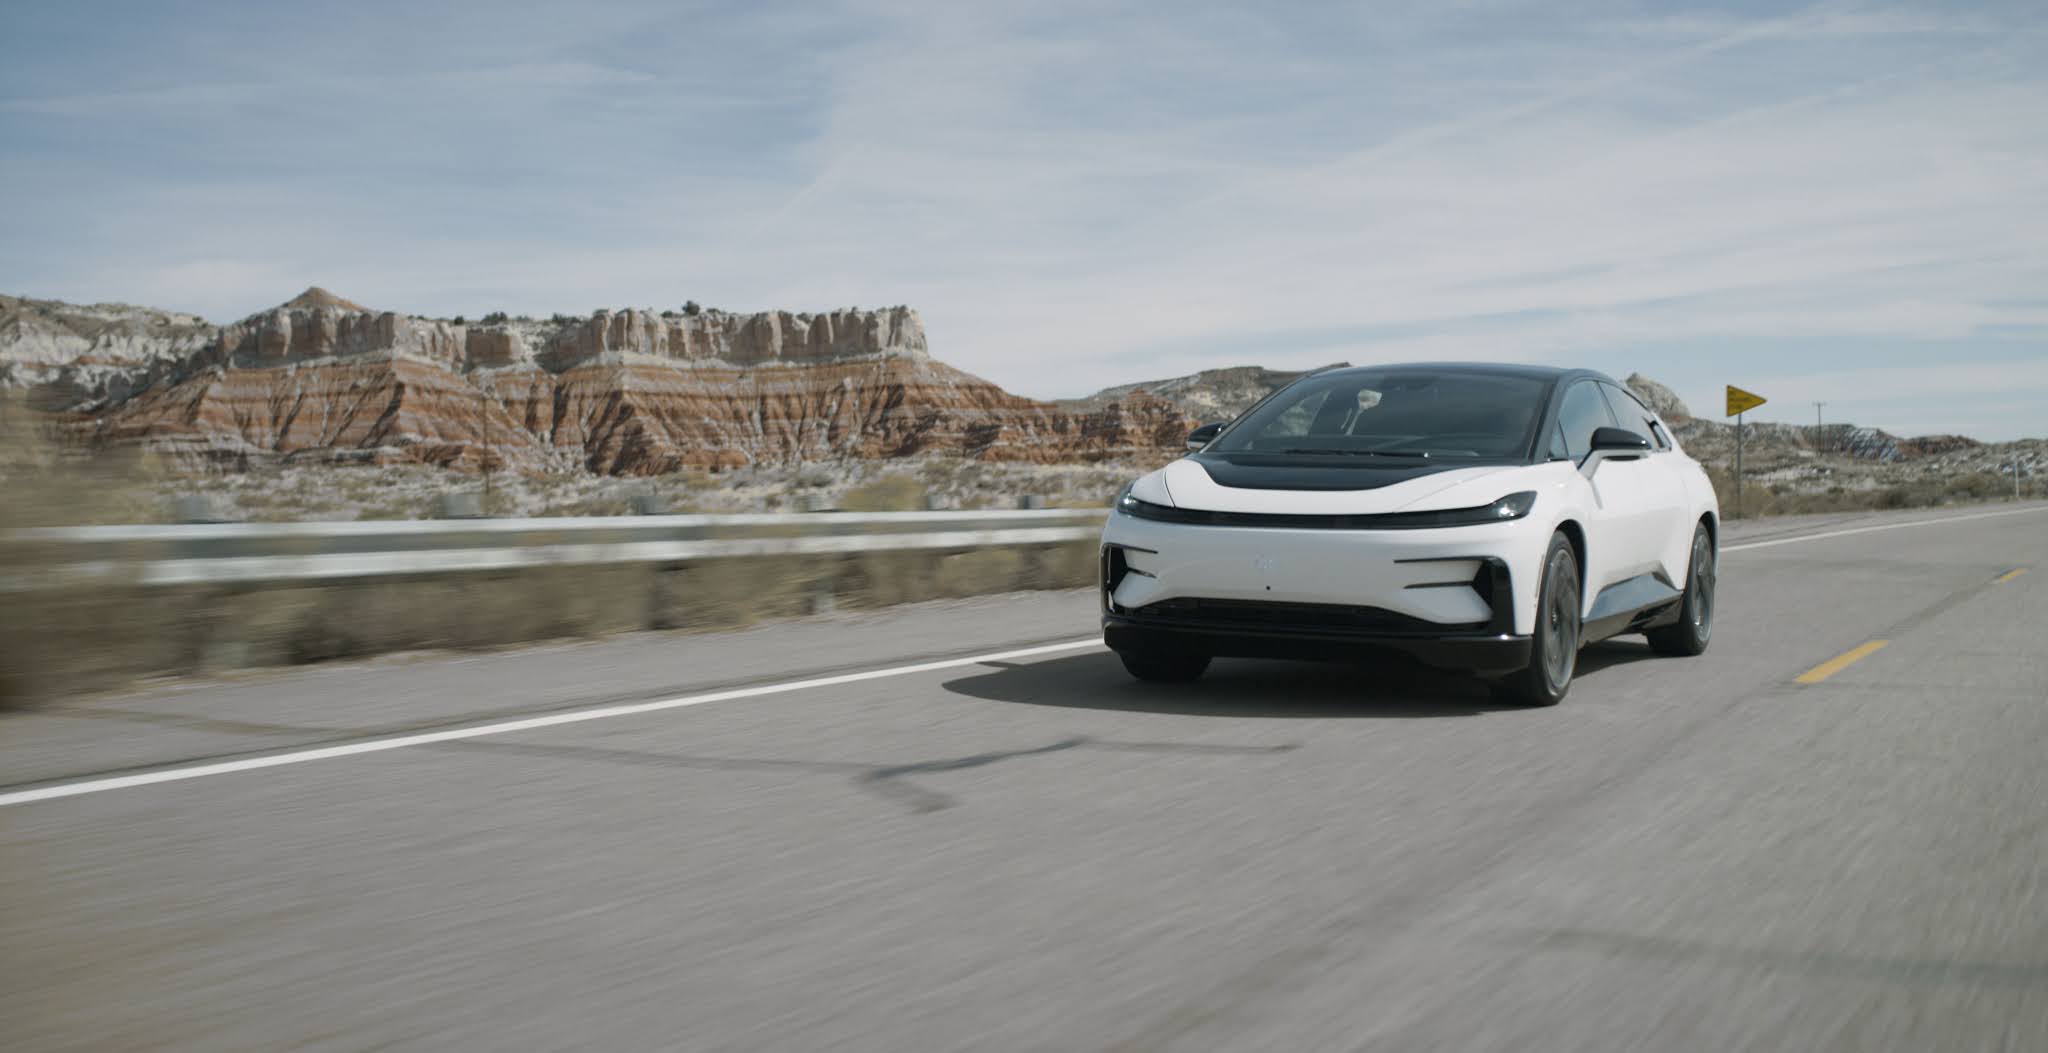 FF 91 to feature comprehensive suite of autonomy features